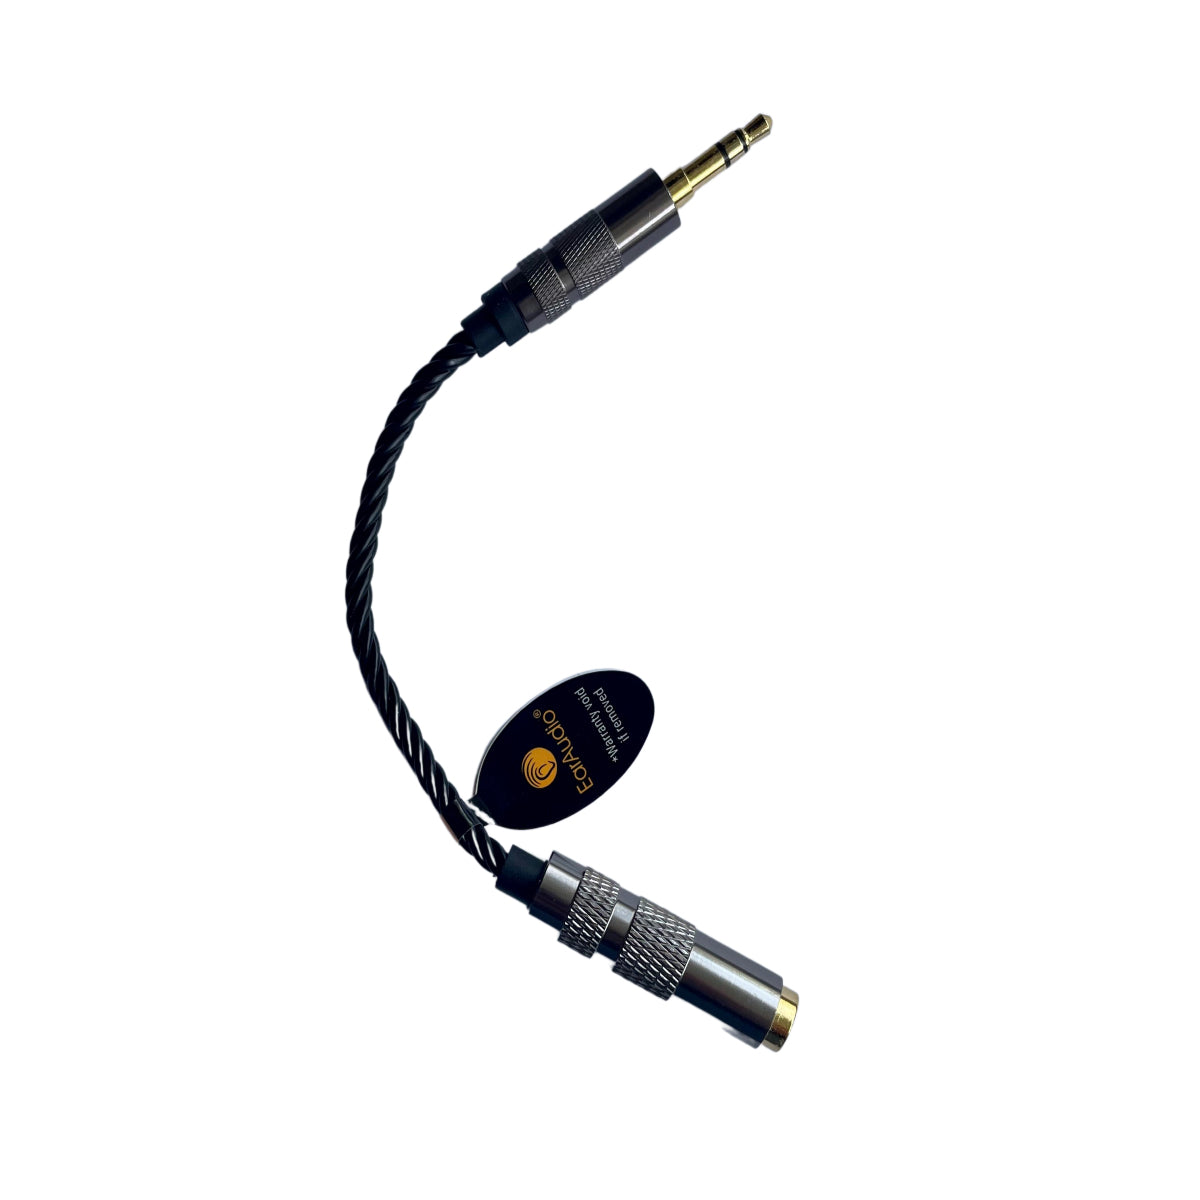 EarAudio 3.5mm Male to 4.4mm female Adapter Cable